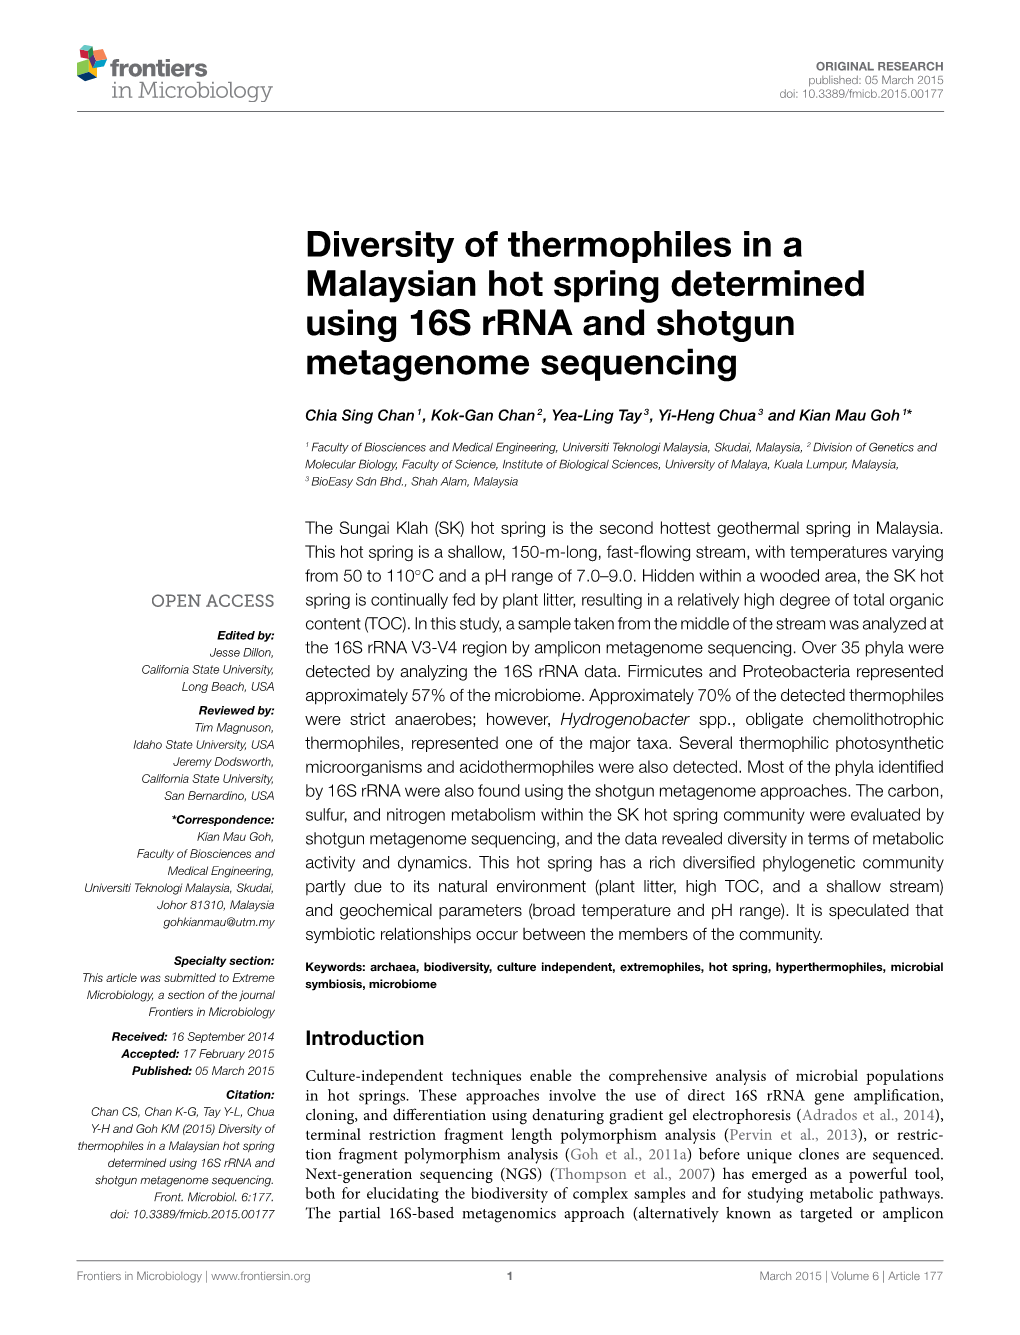 Diversity of Thermophiles in a Malaysian Hot Spring Determined Using 16S Rrna and Shotgun Metagenome Sequencing